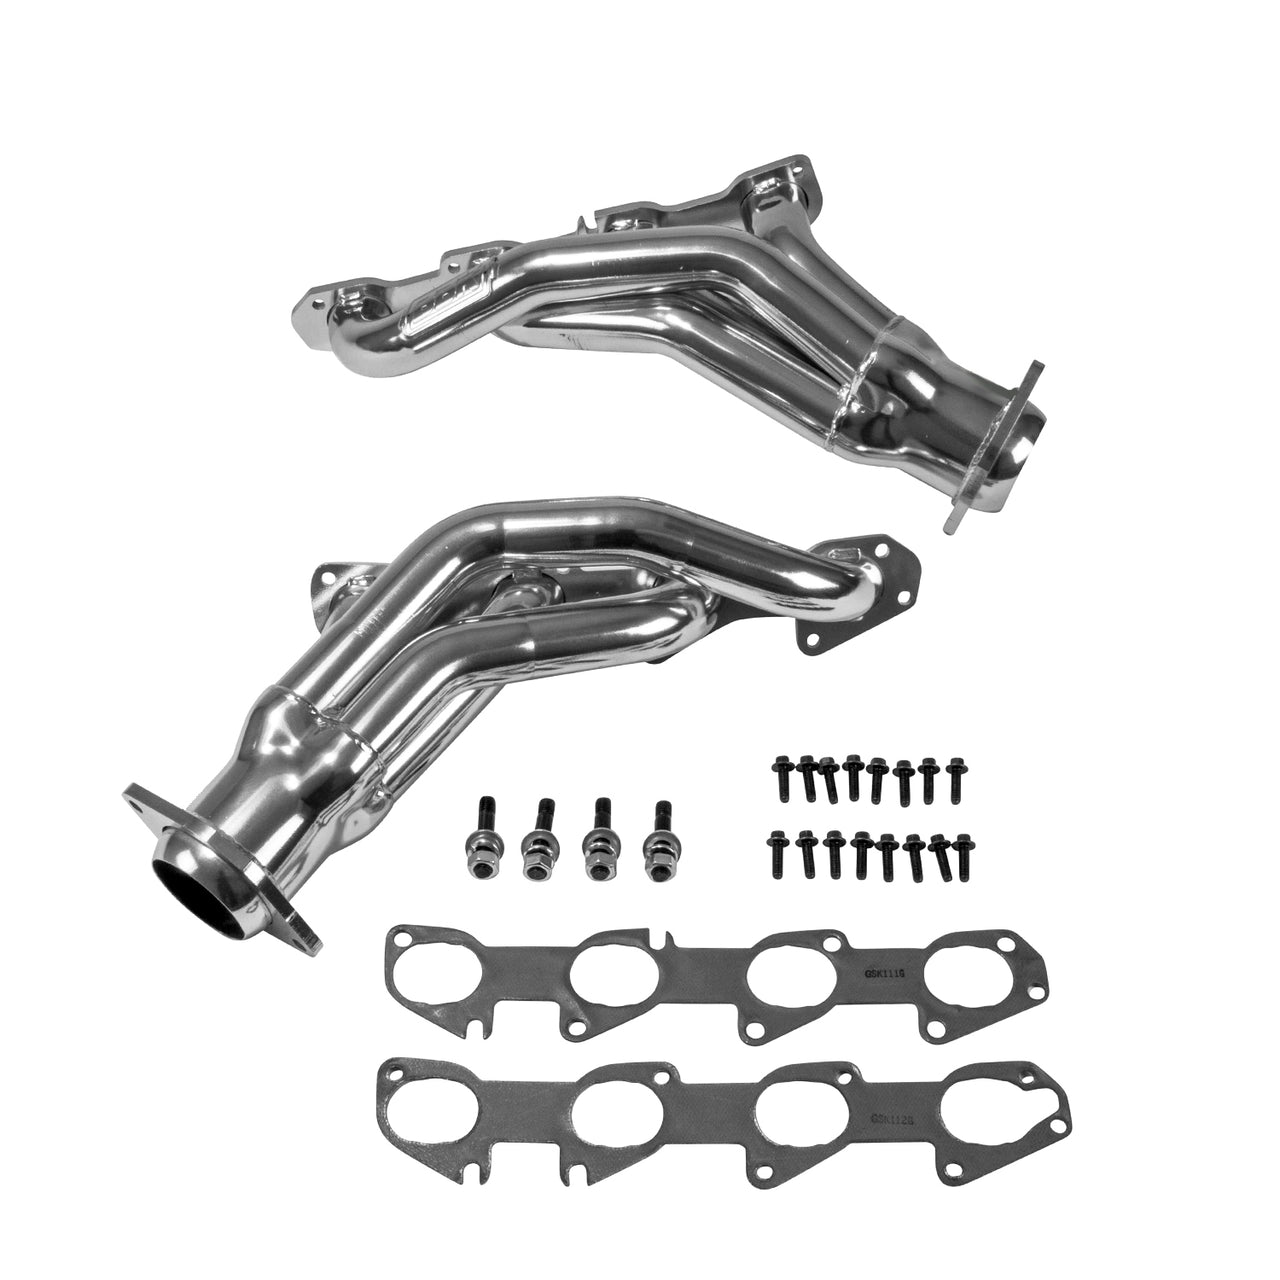 2006-2010 DODGE 6.1L CHALLENGER CHARGER HEMI CARS 1-7/8 SHORTY HEADERS (POLISHED SILVER CERAMIC)